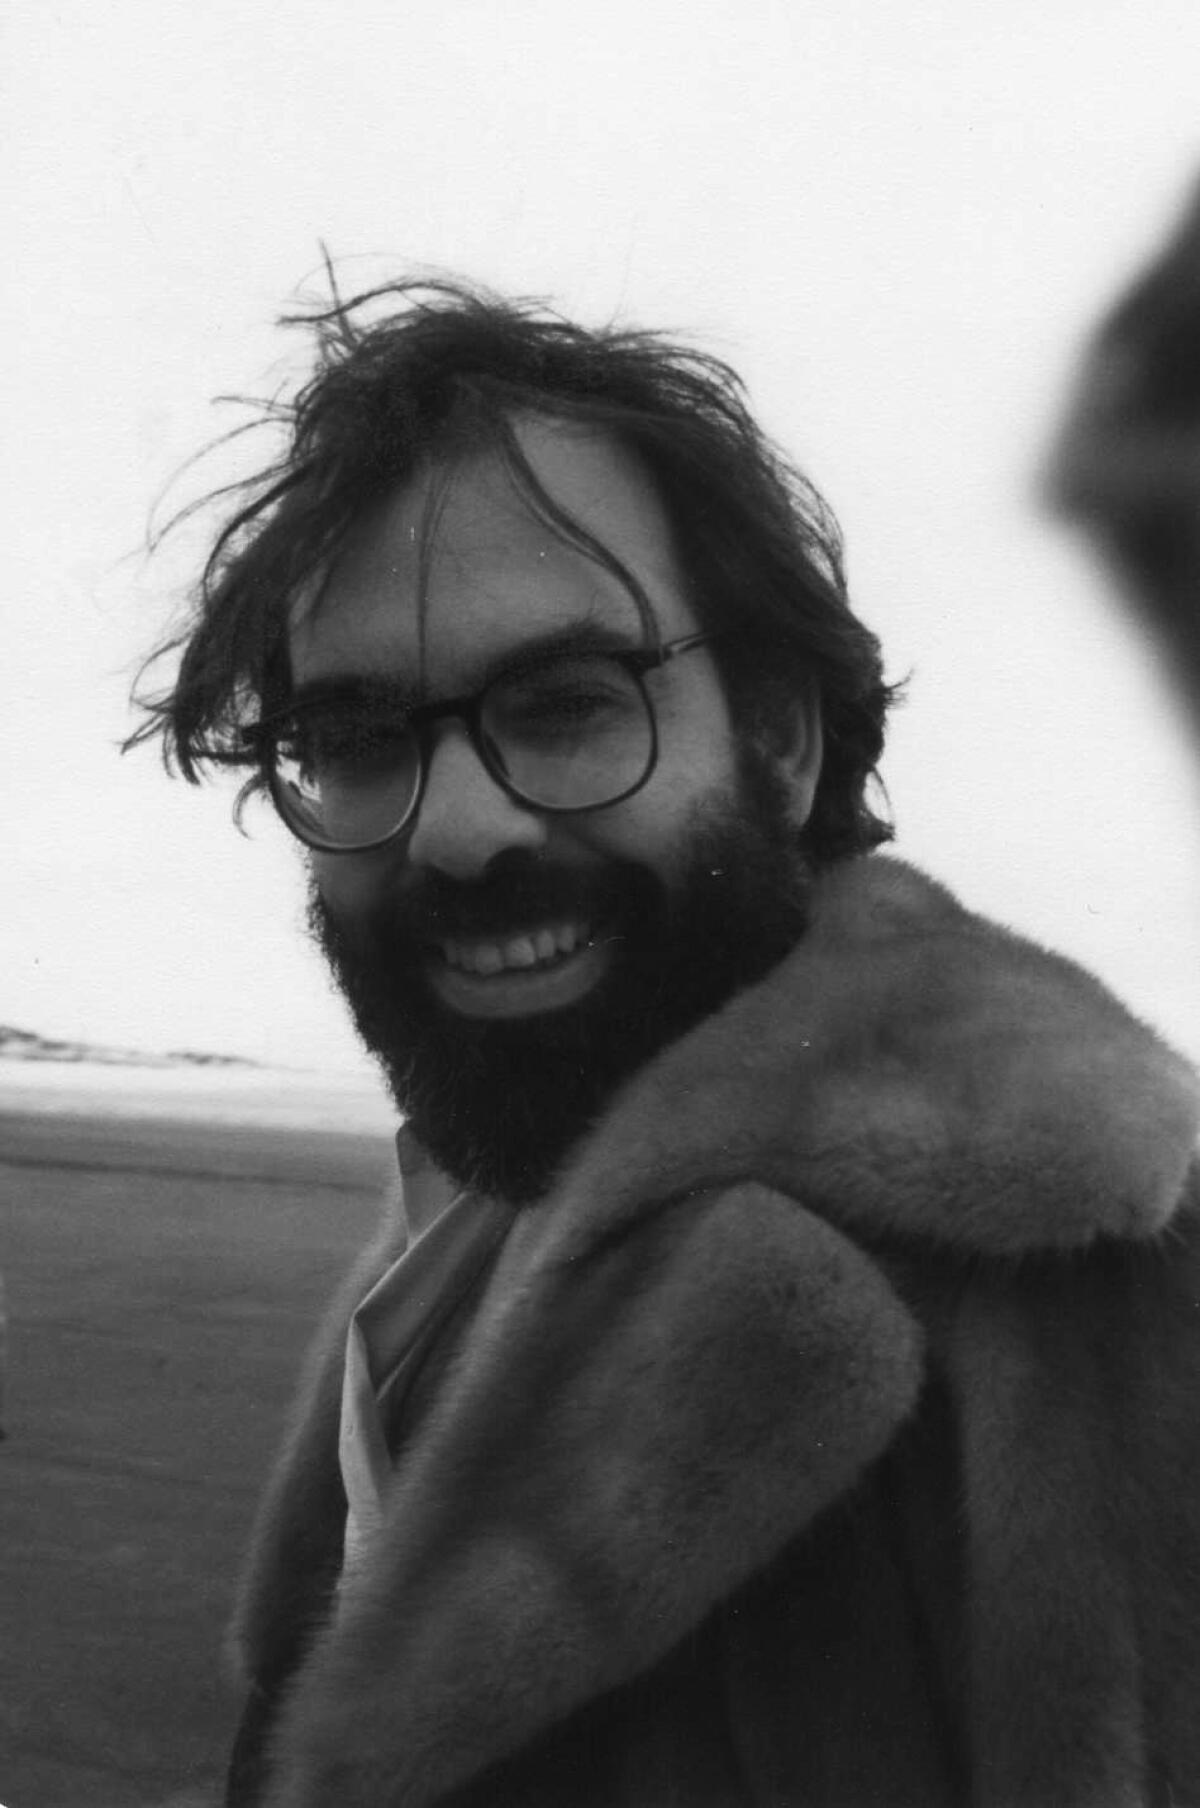 Francis Ford Coppola, a smiling man with an unruly beard and hair, stands on a beach wearing a fur coat.